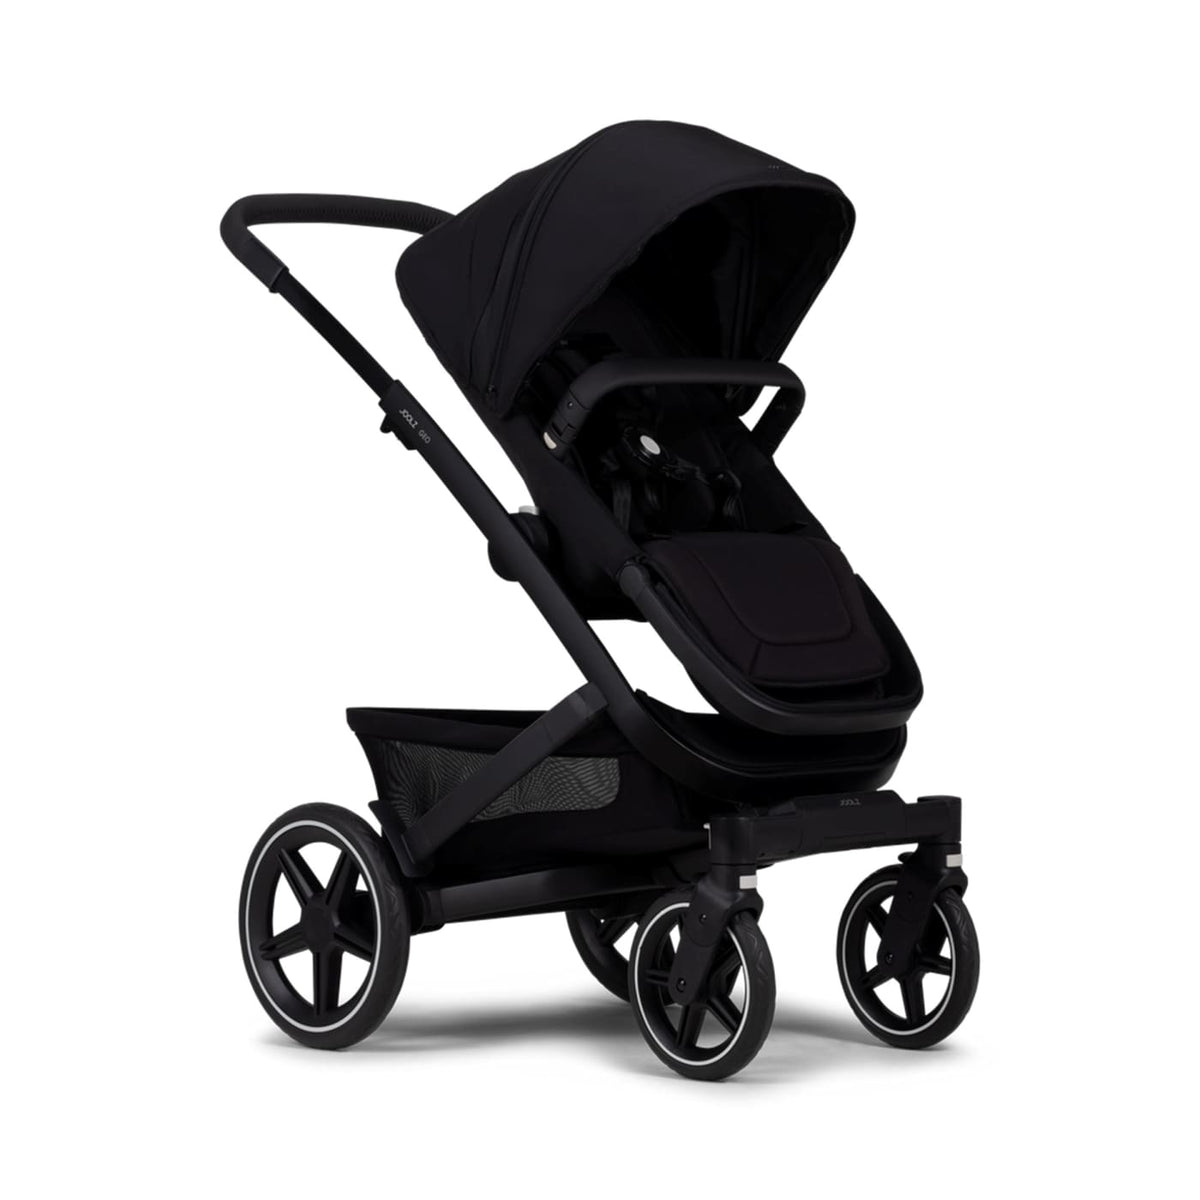 Joolz Geo3 Duo Stroller - Brilliant Black (1 Seat + 1 Carry Cot) - PRAMS &amp; STROLLERS - PACKAGES